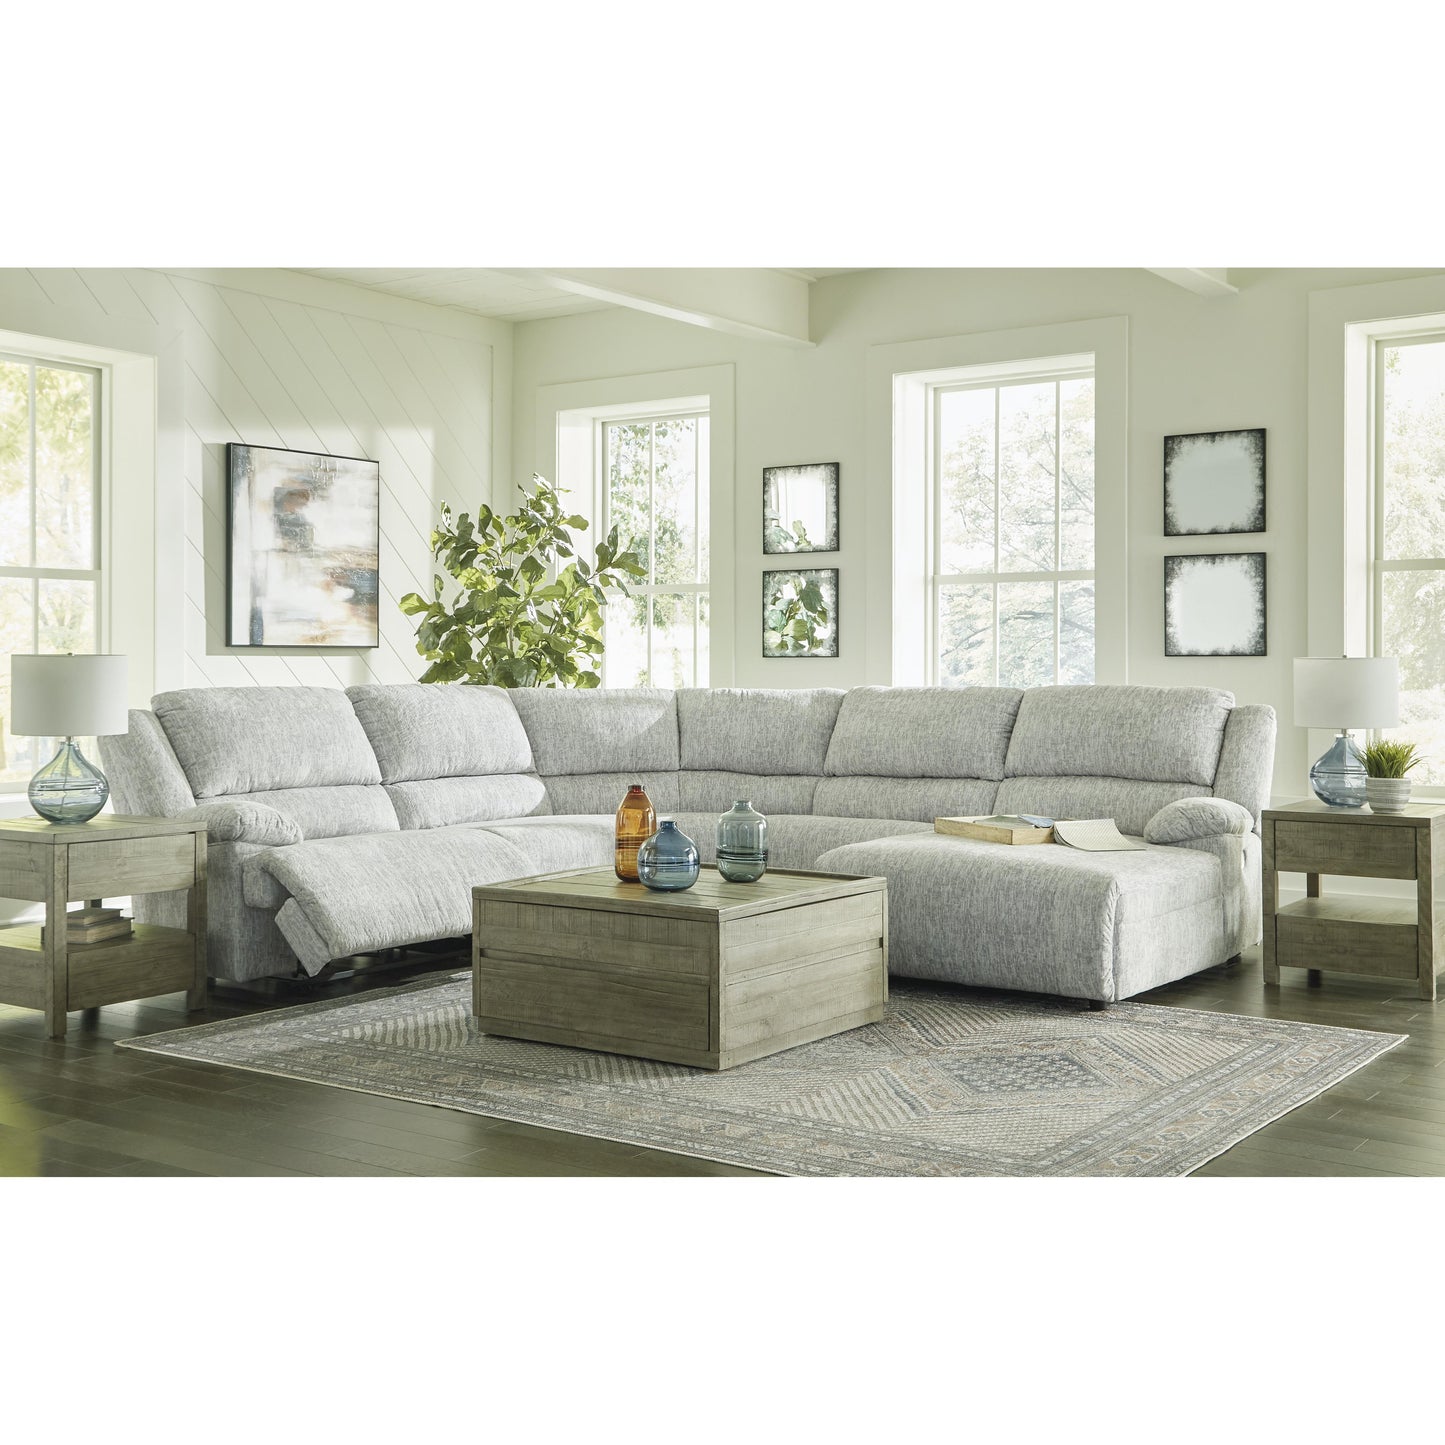 Signature Design by Ashley McClelland Power Reclining Fabric 5 pc Sectional 2930258/2930219/2930277/2930246/2930297 IMAGE 5